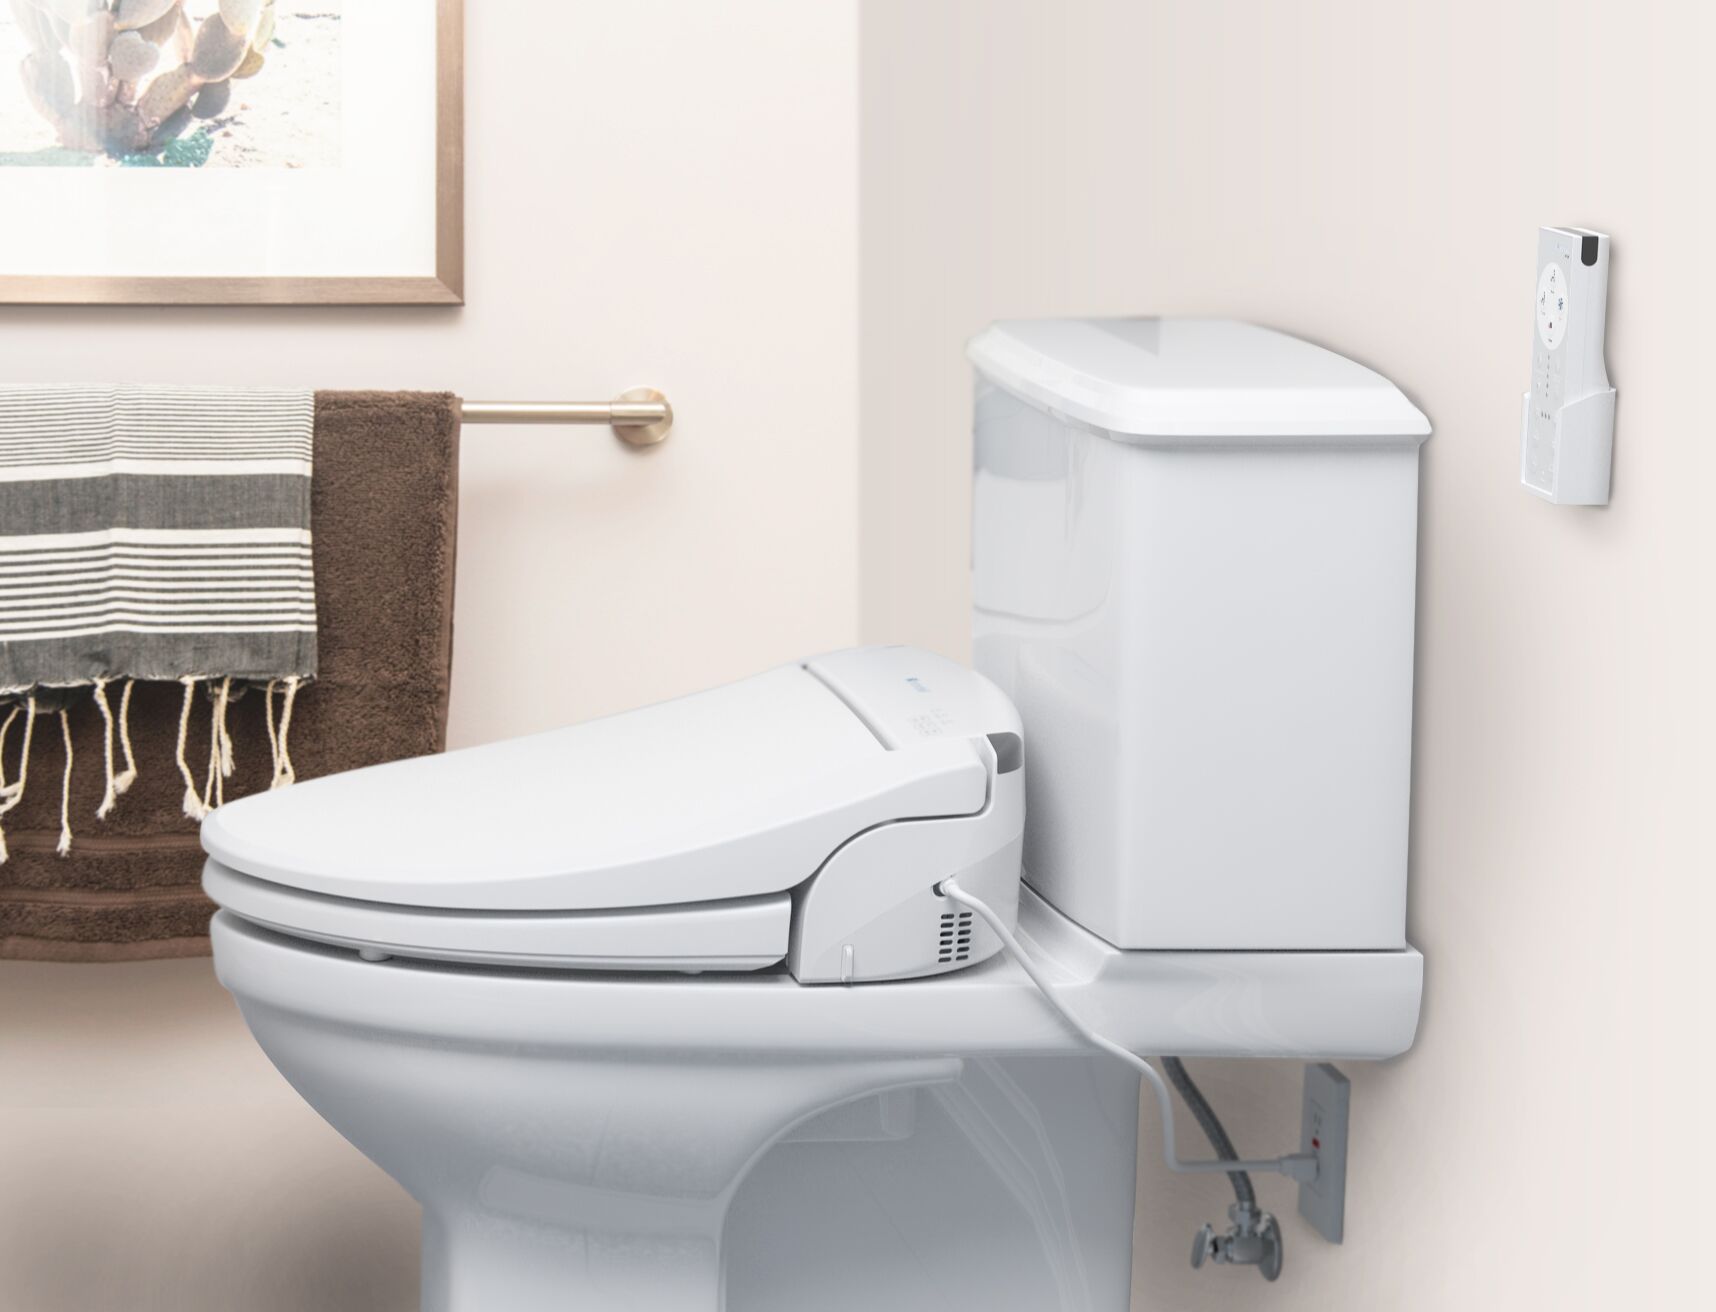 Swash DS725 Heated Toilet Seat